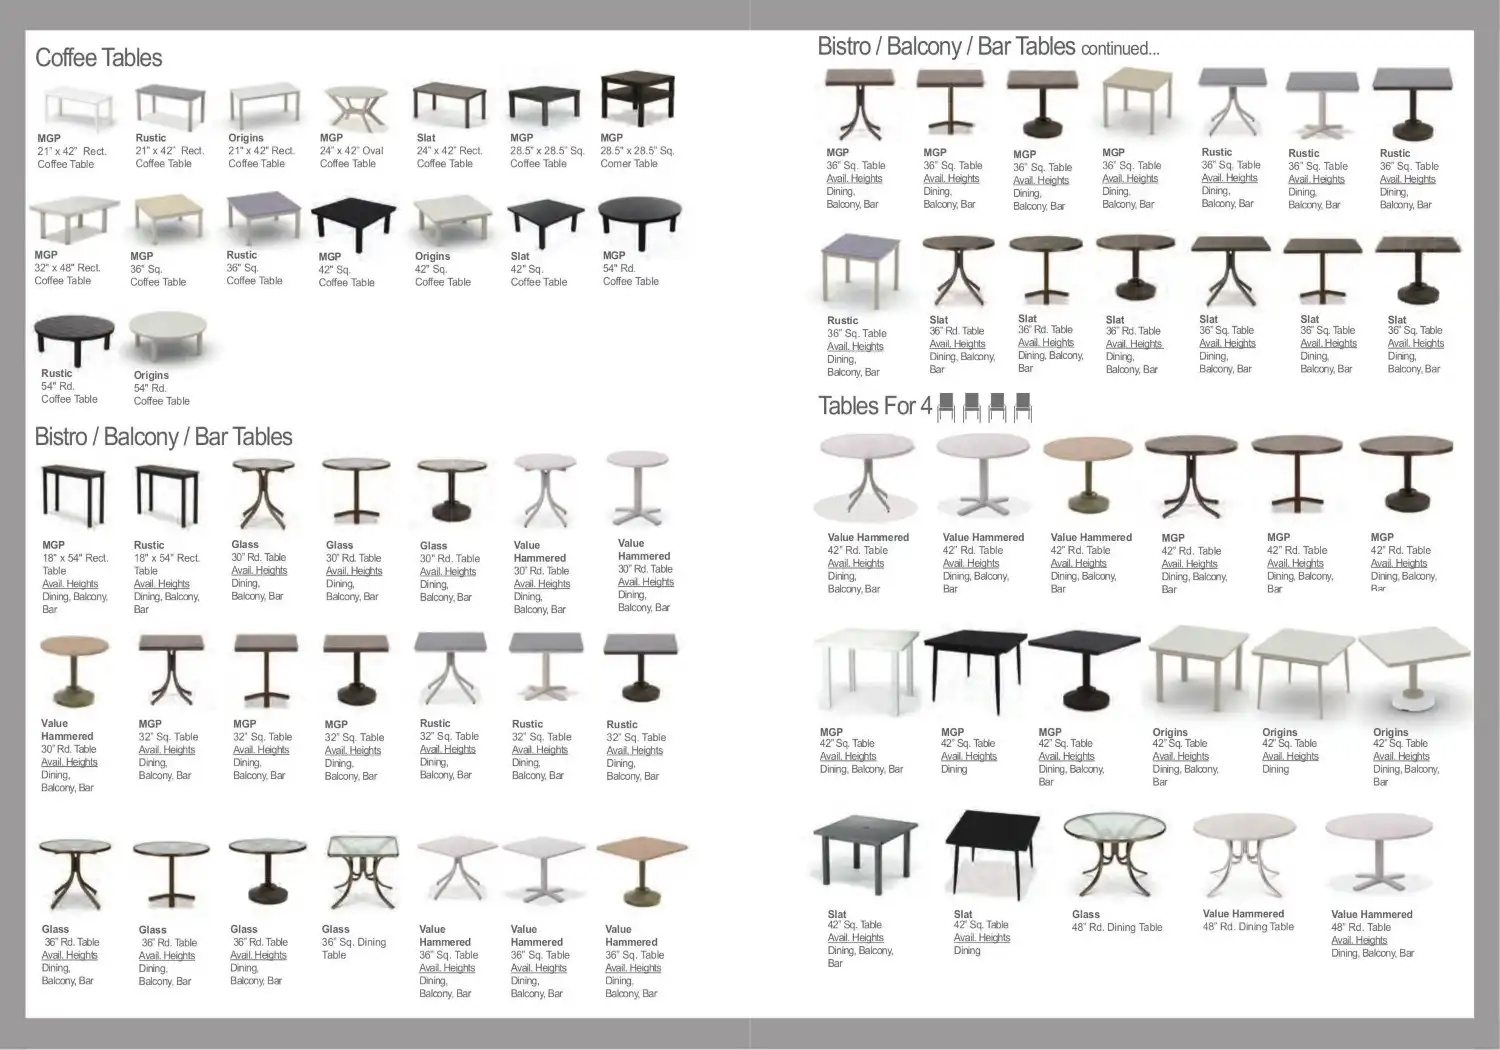 COFFEE, BISTRO & BAR TABLES (TABLES FOR 4)